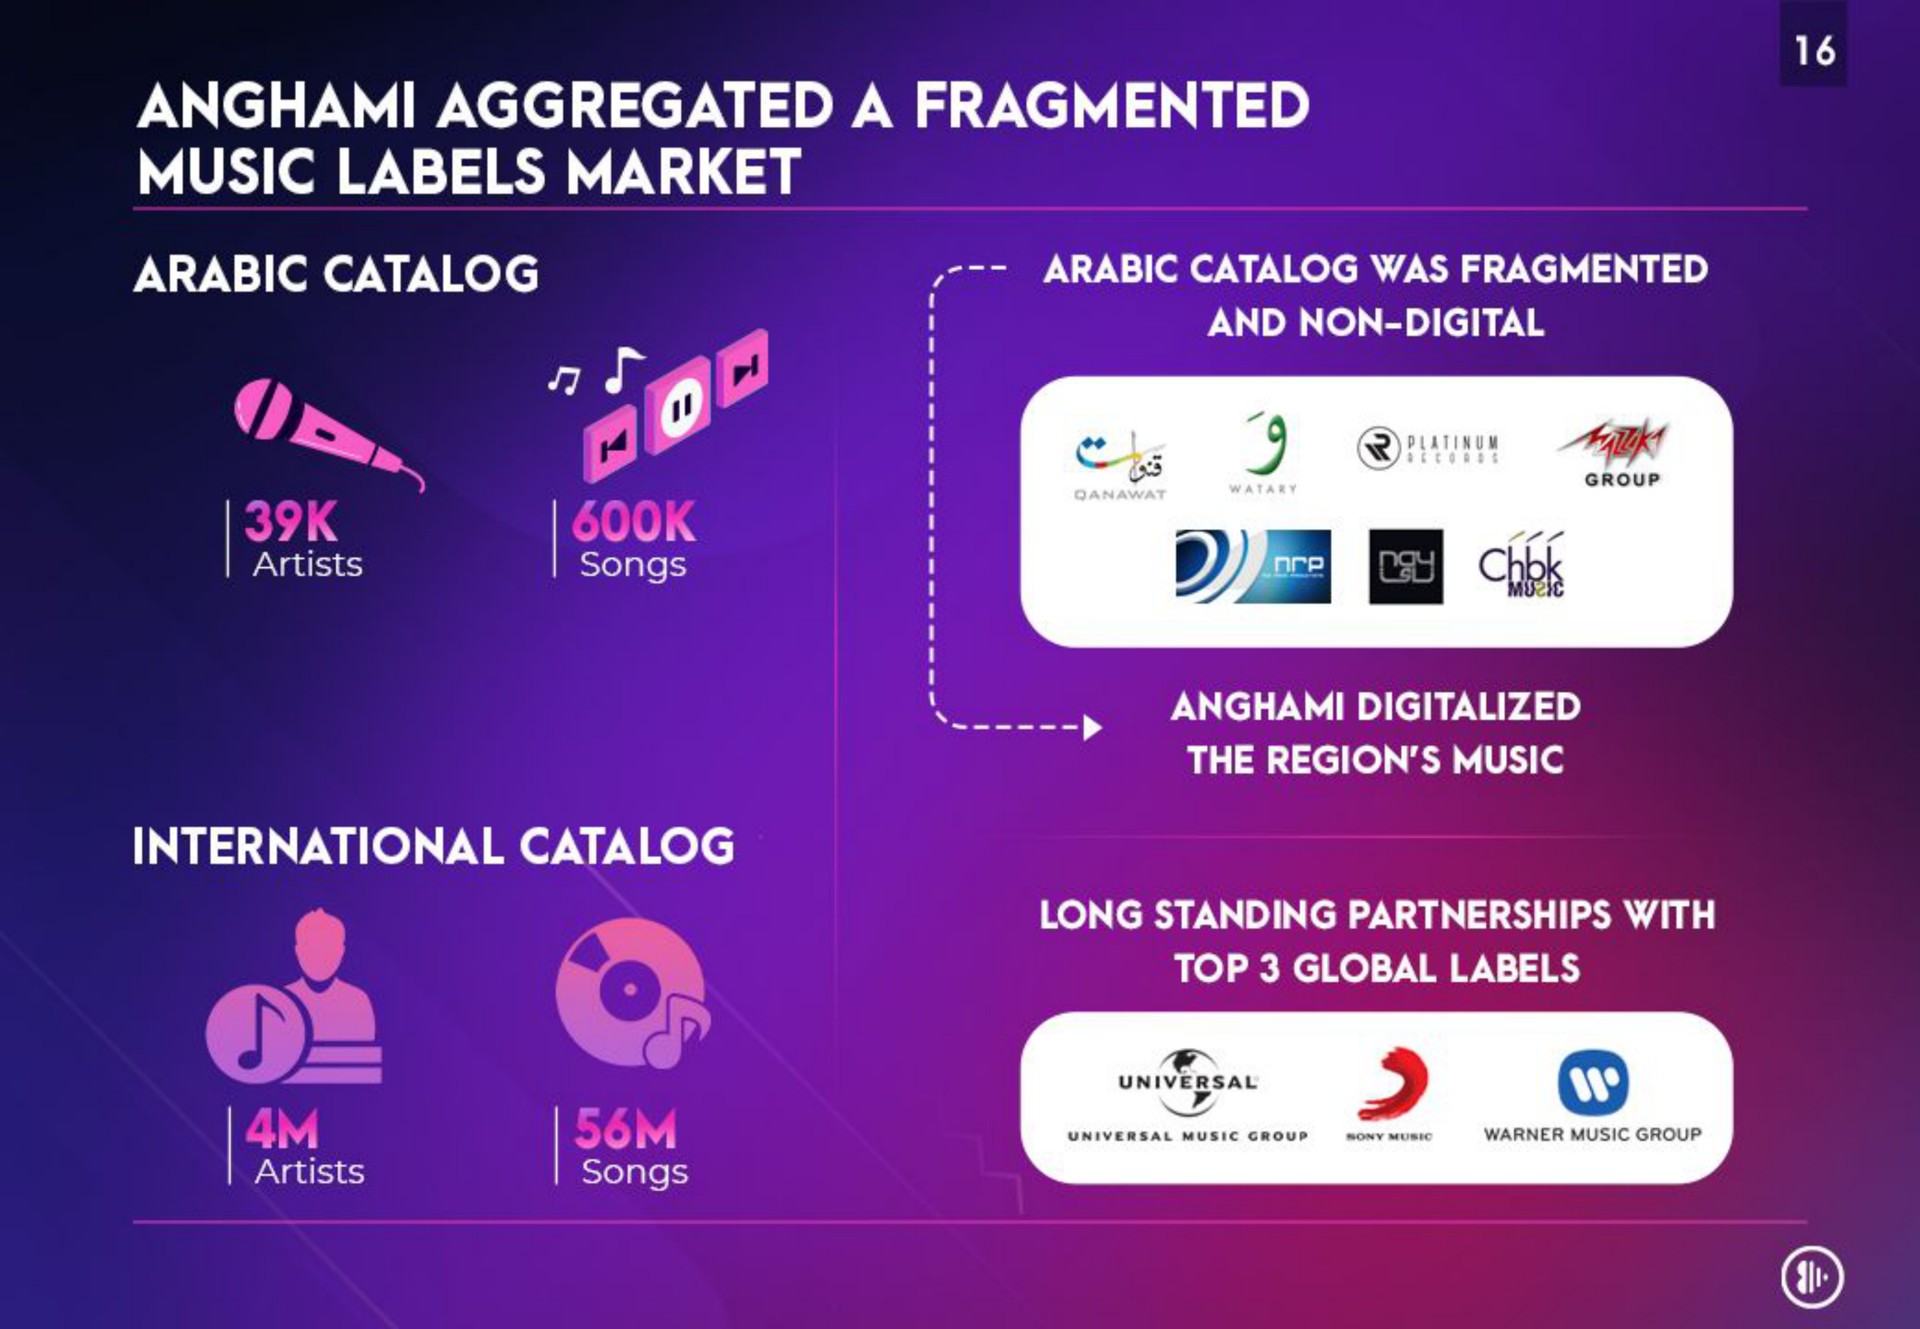 aggregated a fragmented music labels market a | Anghami